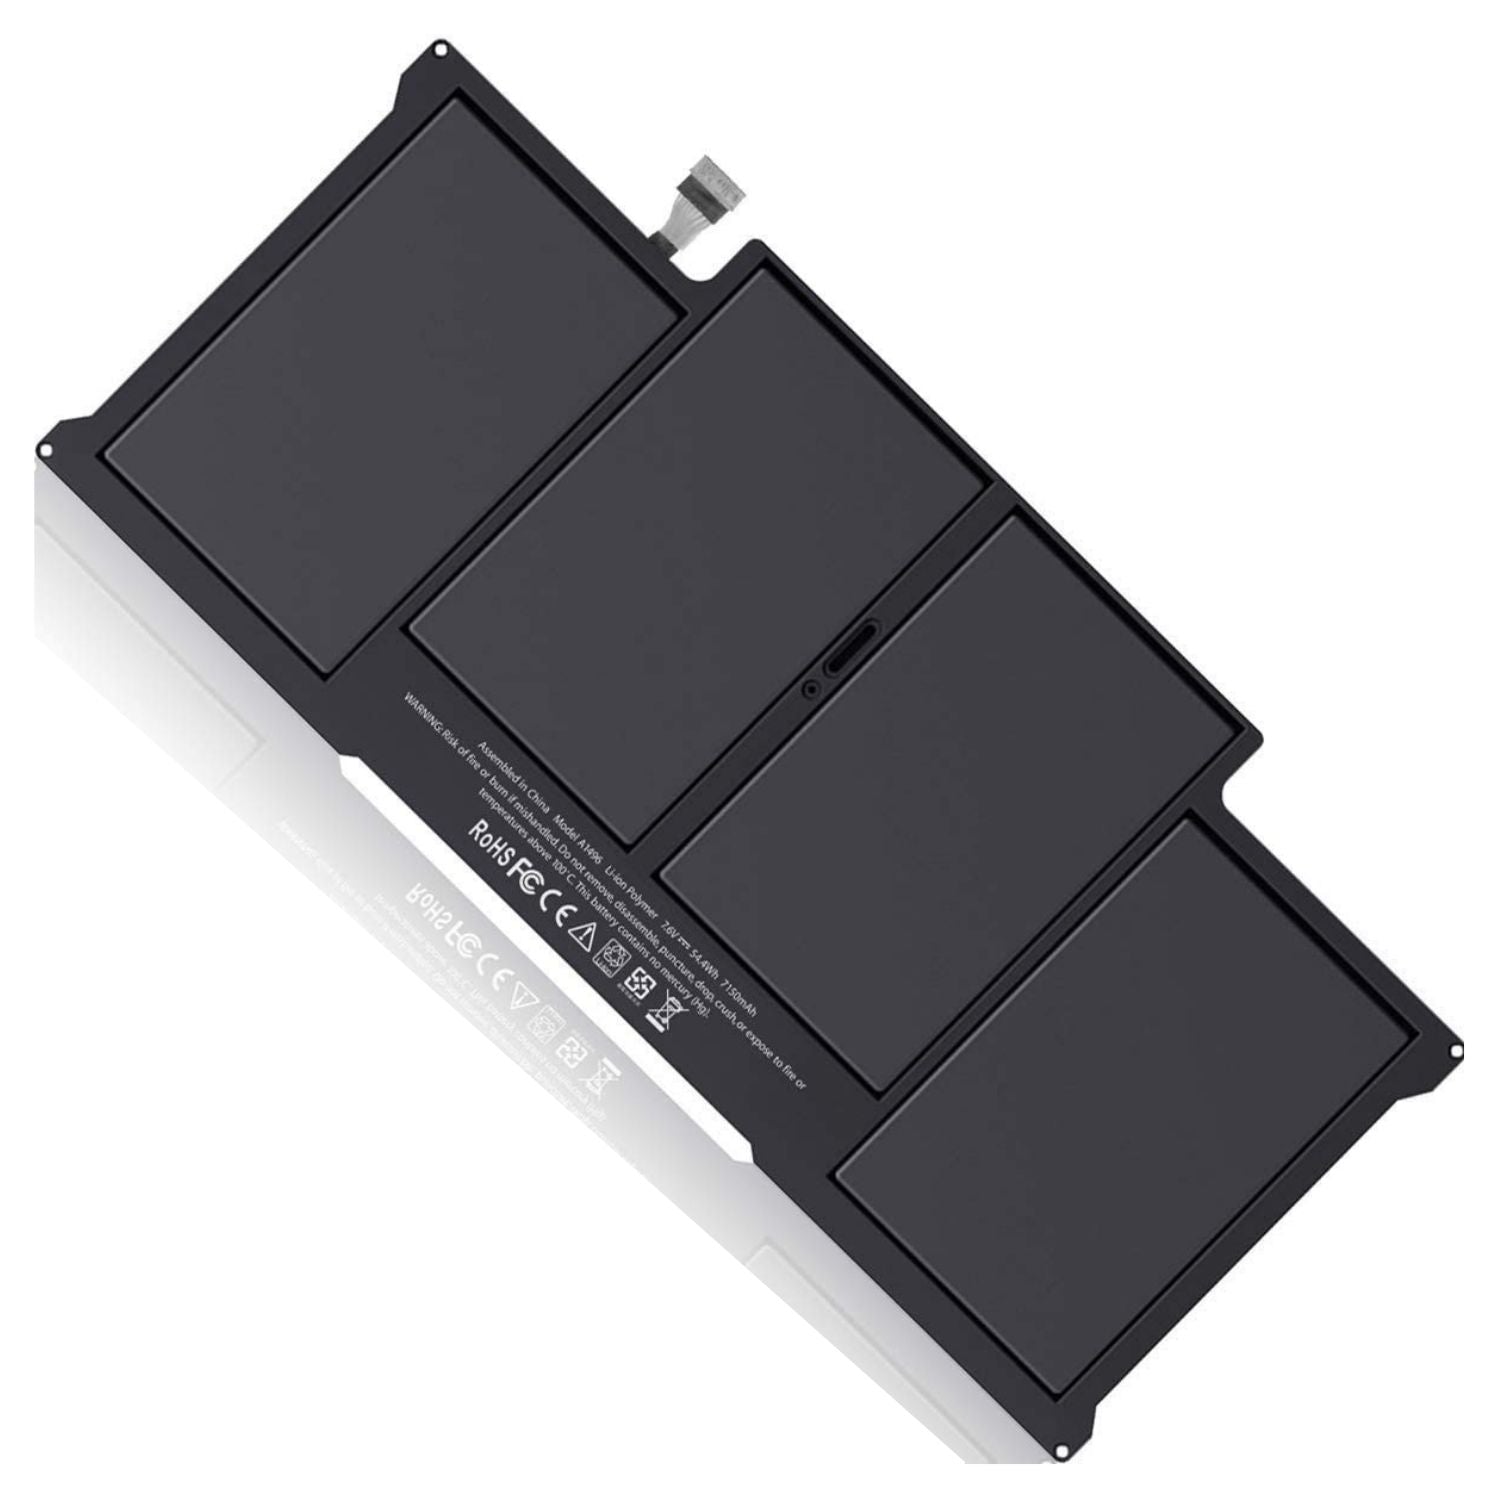 Apple A1496 Laptop Battery for MacBook Air 13 inch A1466 A1377 A1405 (2017, Early 2015, Early 2014, Mid 2013, Mid 2012, Mid 2011) A1369 (Mid 2011, Late 2010) MC503LL/A MC504LL/A MC965LL Series Laptop's.